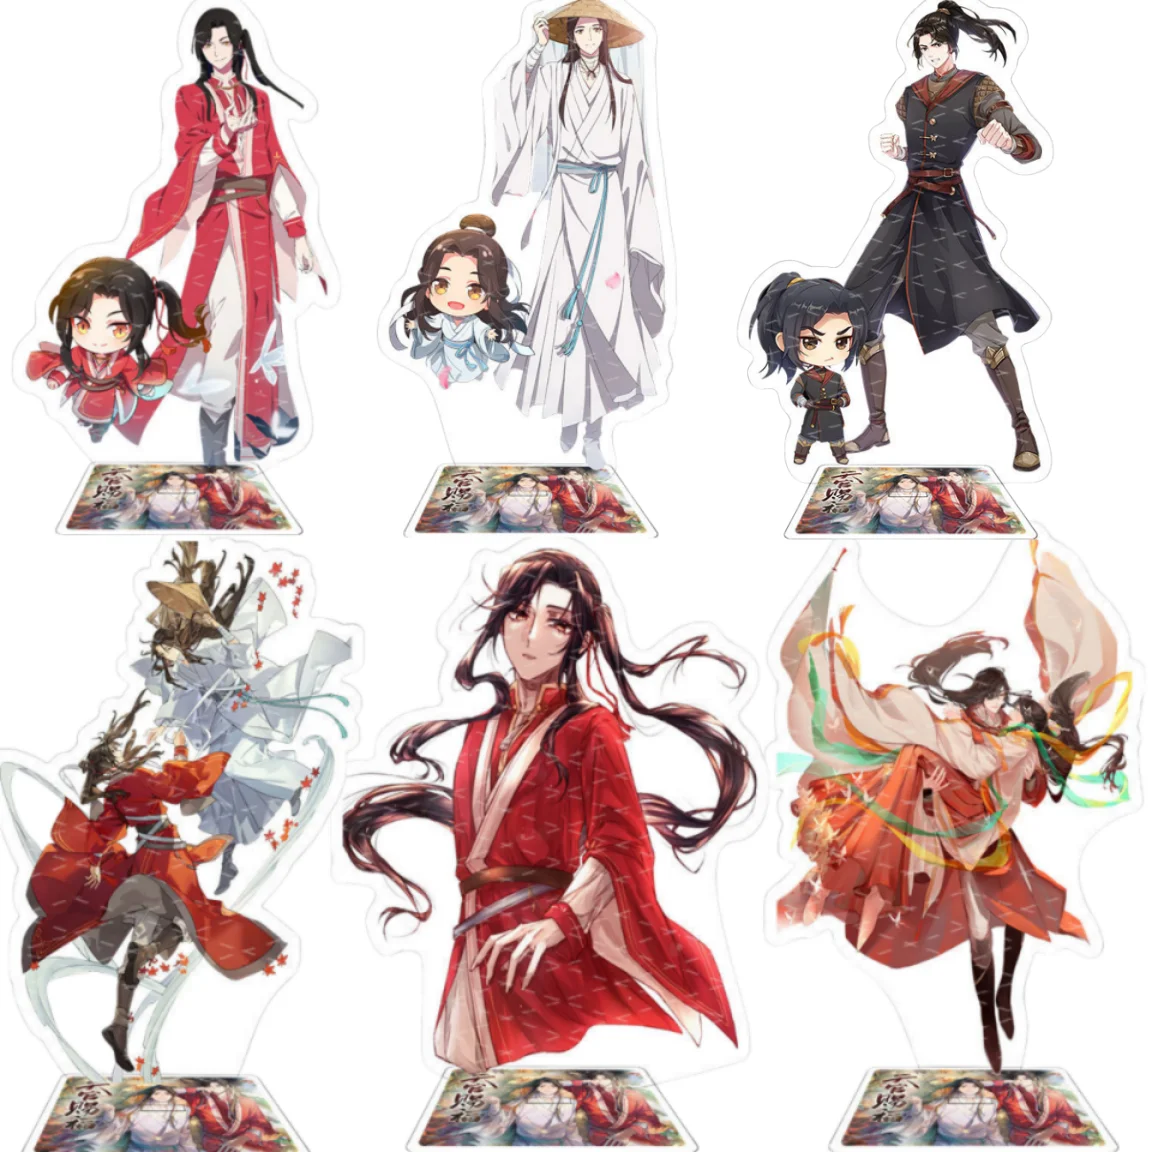 Hot Anime Heavenly God Blesses The People Tian Guan Ci Fu Xie Lian Hua Cheng Acrylic Stand Model Cartoon Figures Fans Gifts 15cm lots of master 1 64 defender 110 diecast toys car model camel cup gulf limited edition gifts collection